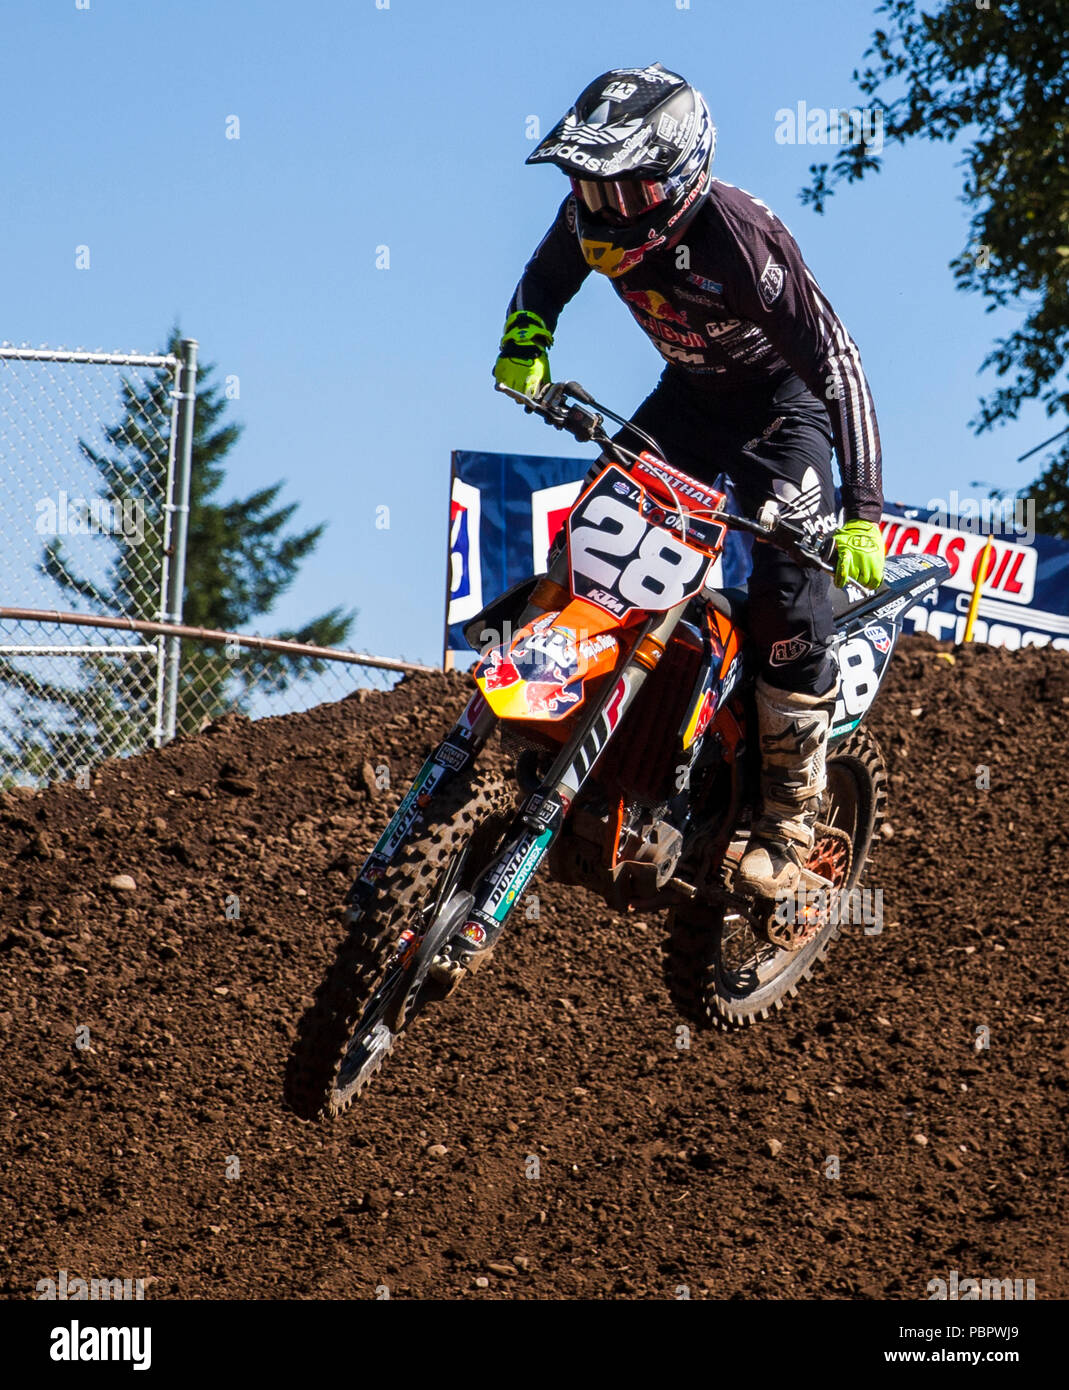 Washougal Wa Usa 28th July 18 28 Shane Mc Elrath Coming Off A Jump 33 During